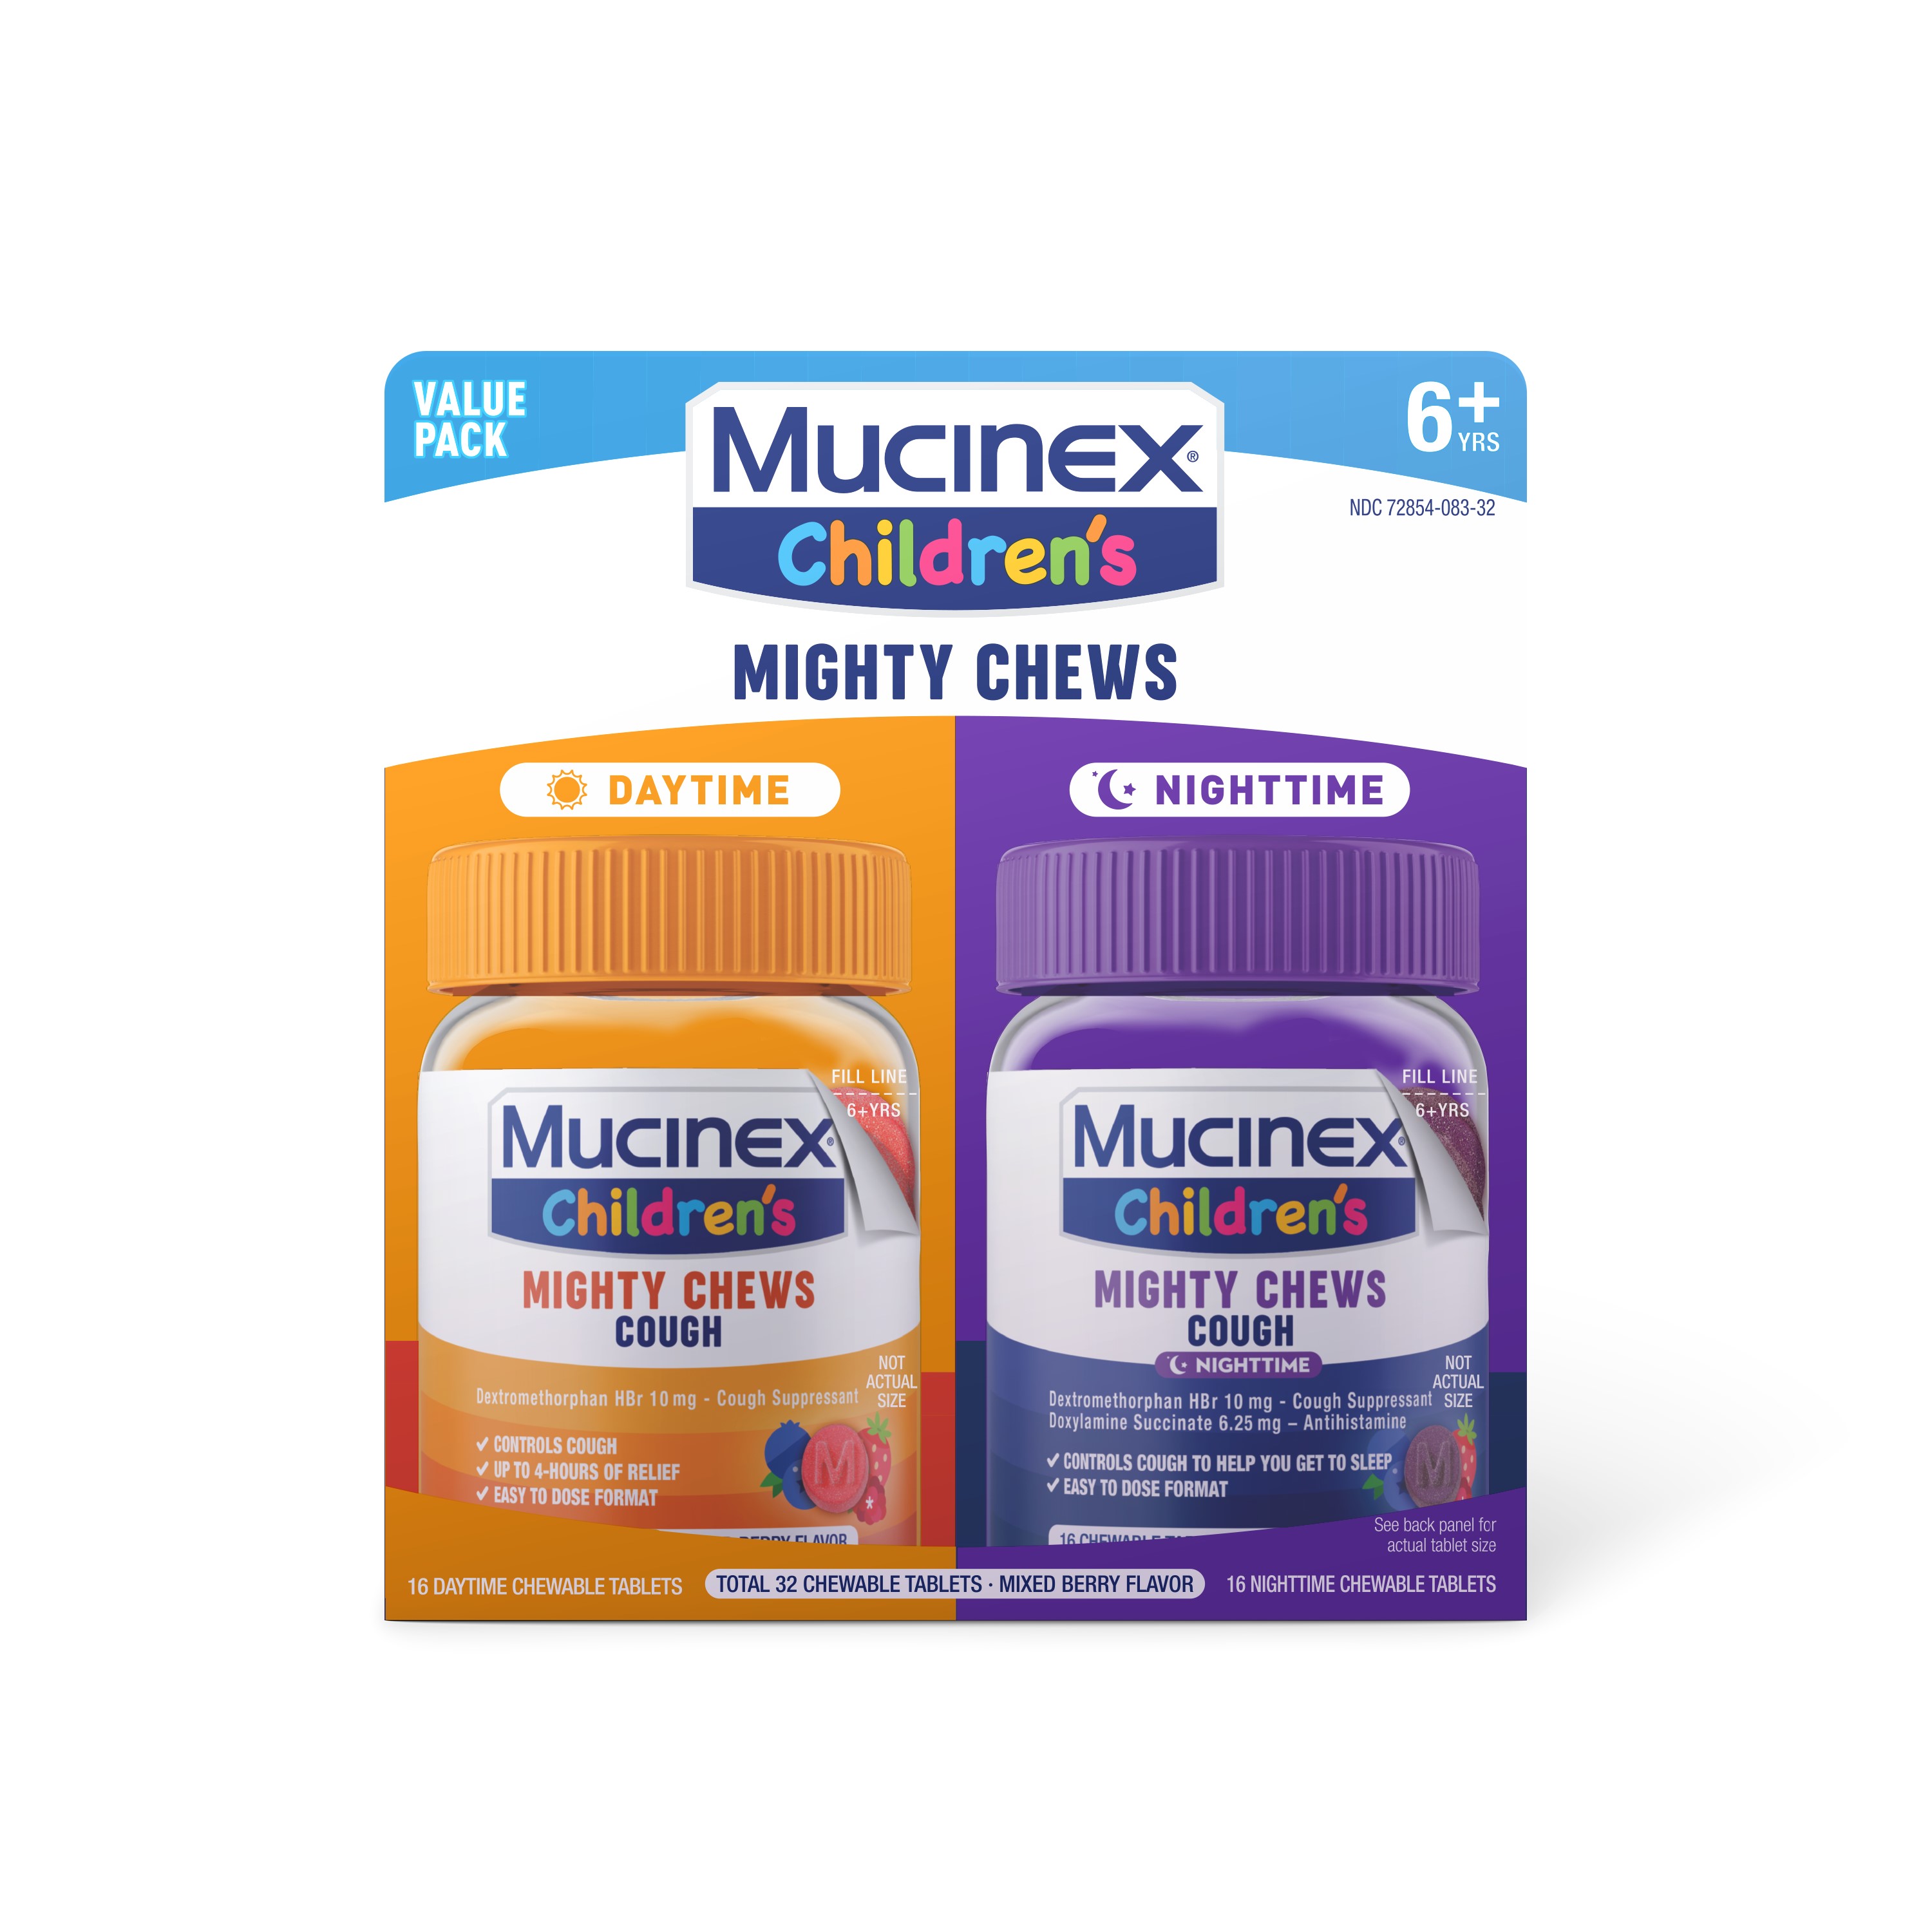 MUCINEX® Children's Mighty Chews - Cough Combo Pack (Daytime)